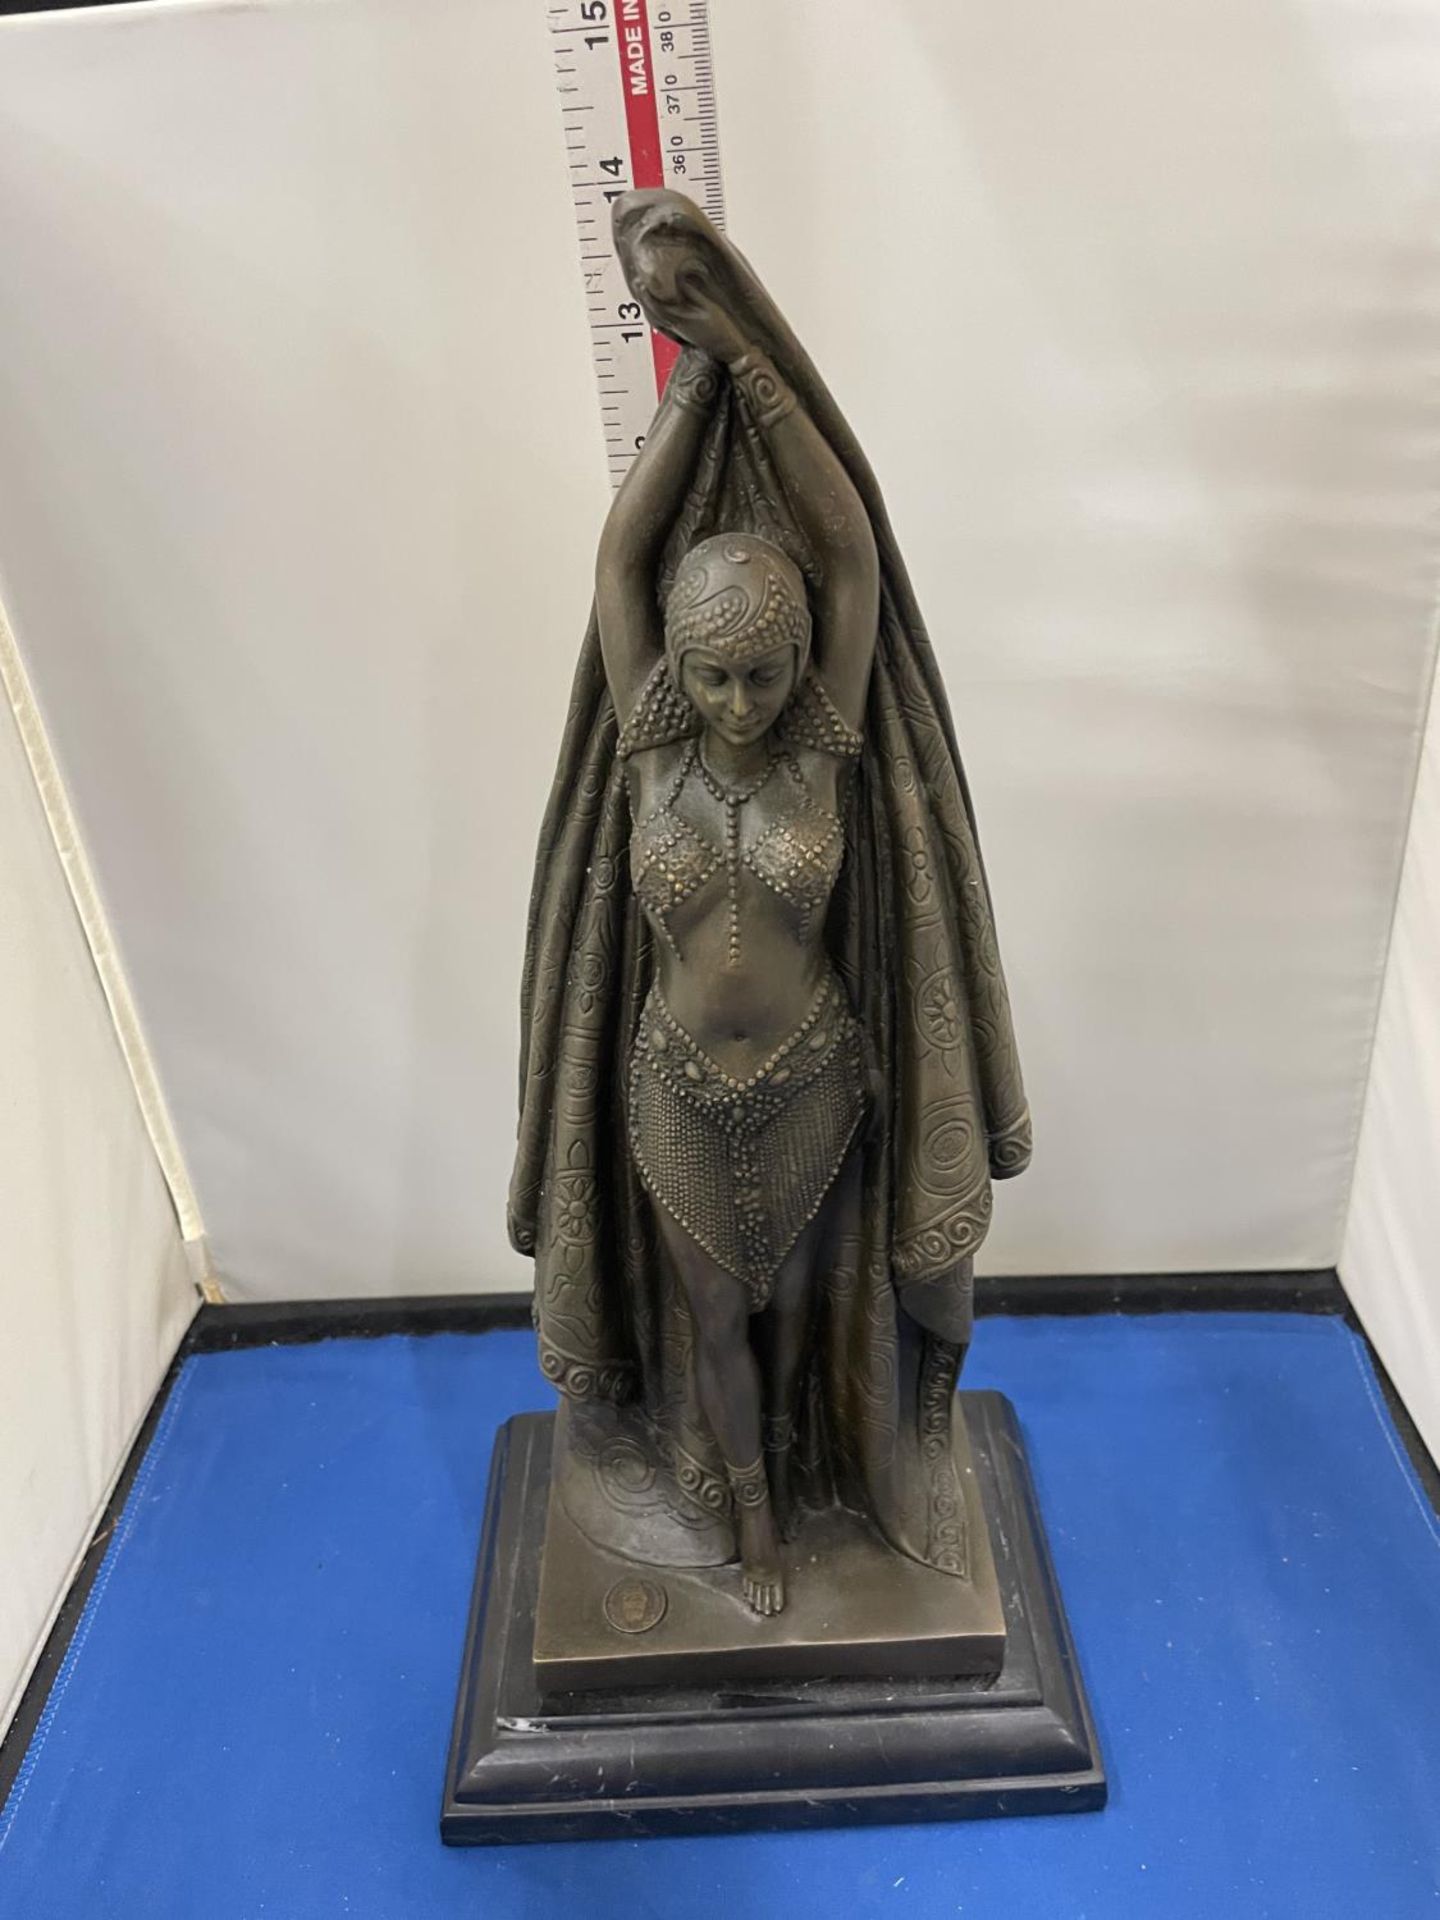 A ART NOUVEAU STYLE BRONZE AFTER DEMETRE CHIPARUS RAMESE'S ENTERTAINER DANCER ART WITH STAMP - Image 8 of 12